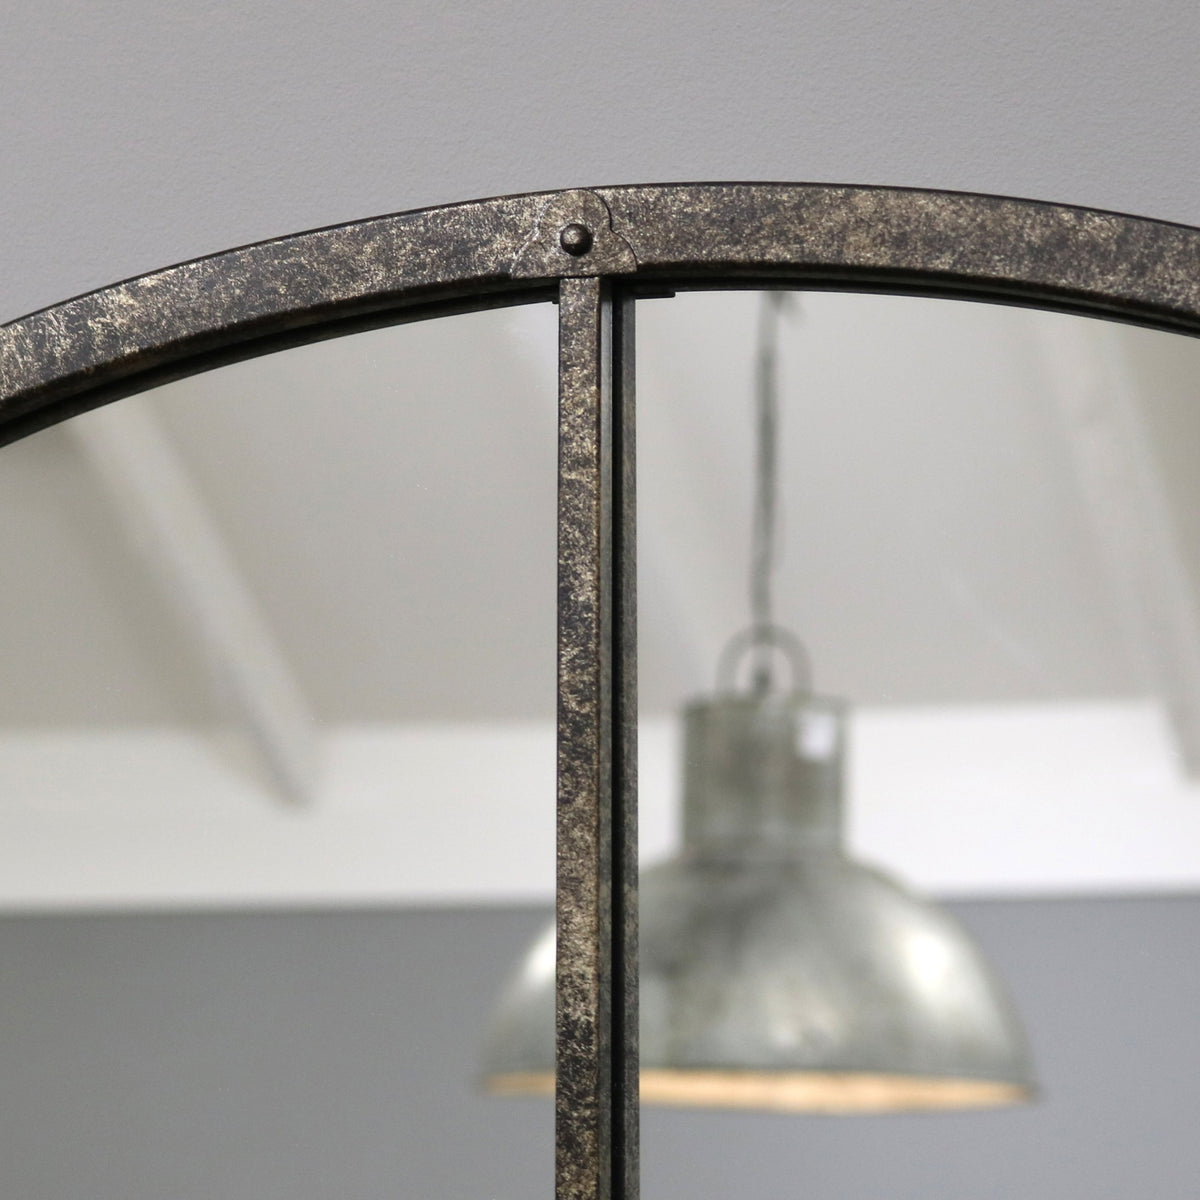 Crushed black industrial arched metal wall mirror closeup of arch